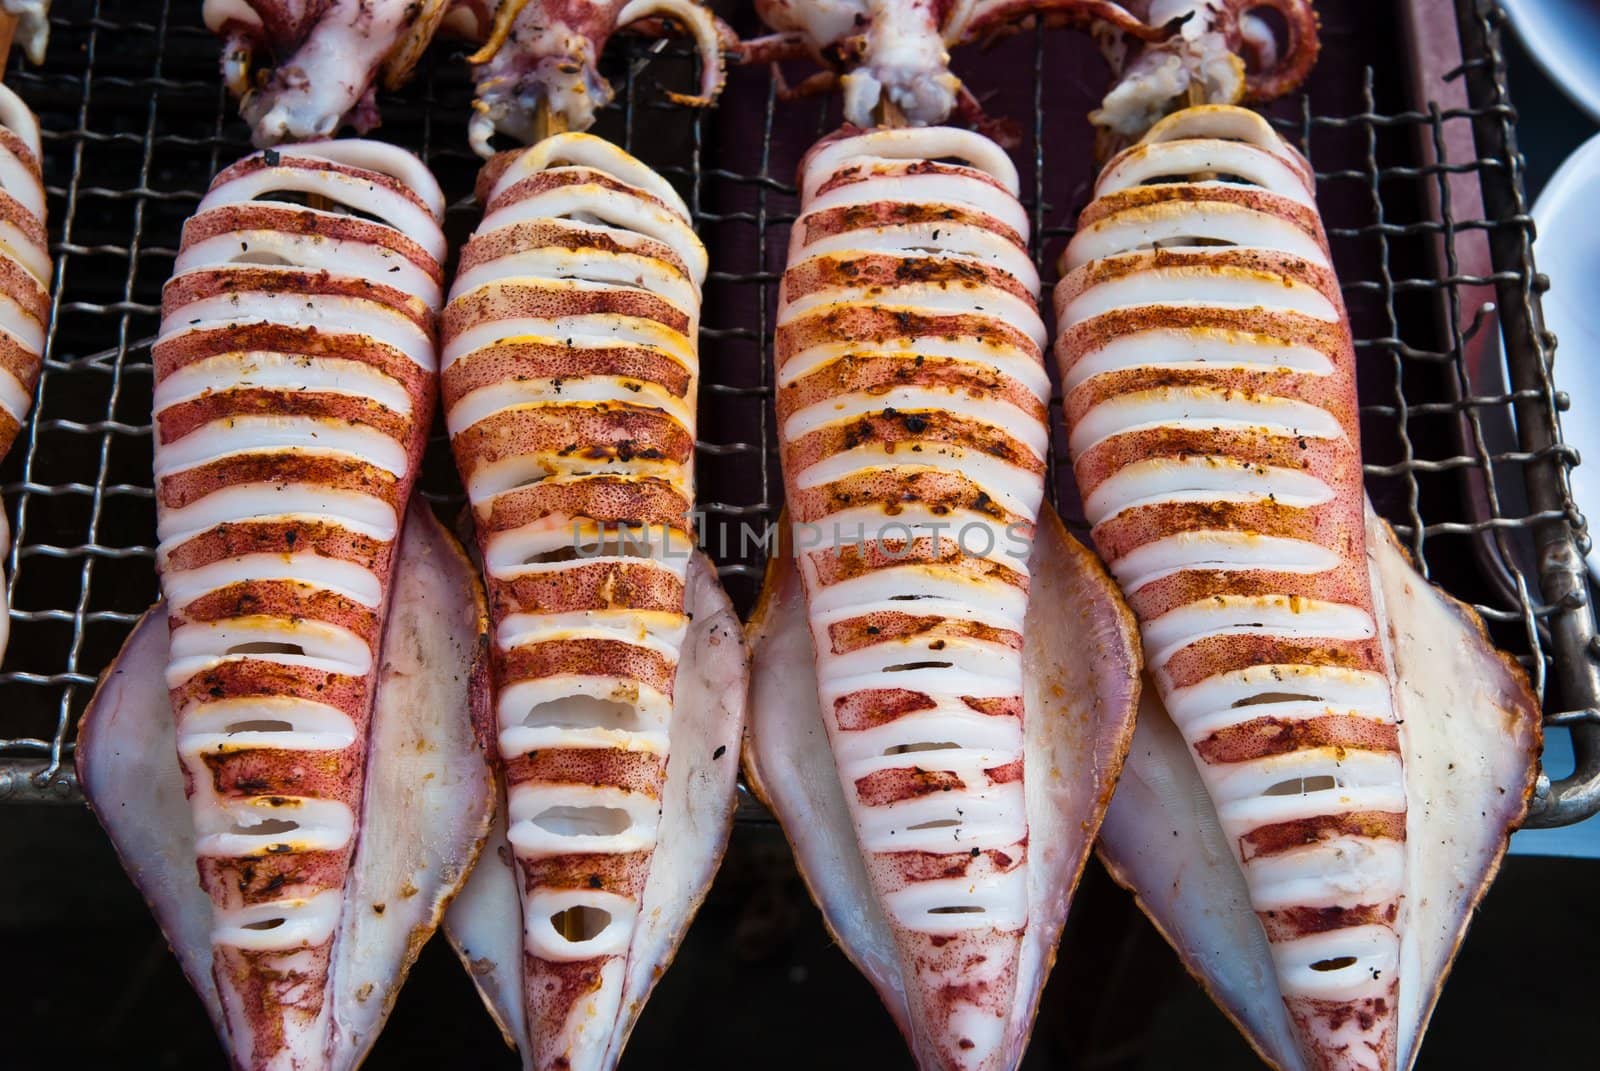 Flame grilled large squids on a bbq platform, use for seafood, health and wellness related concepts
